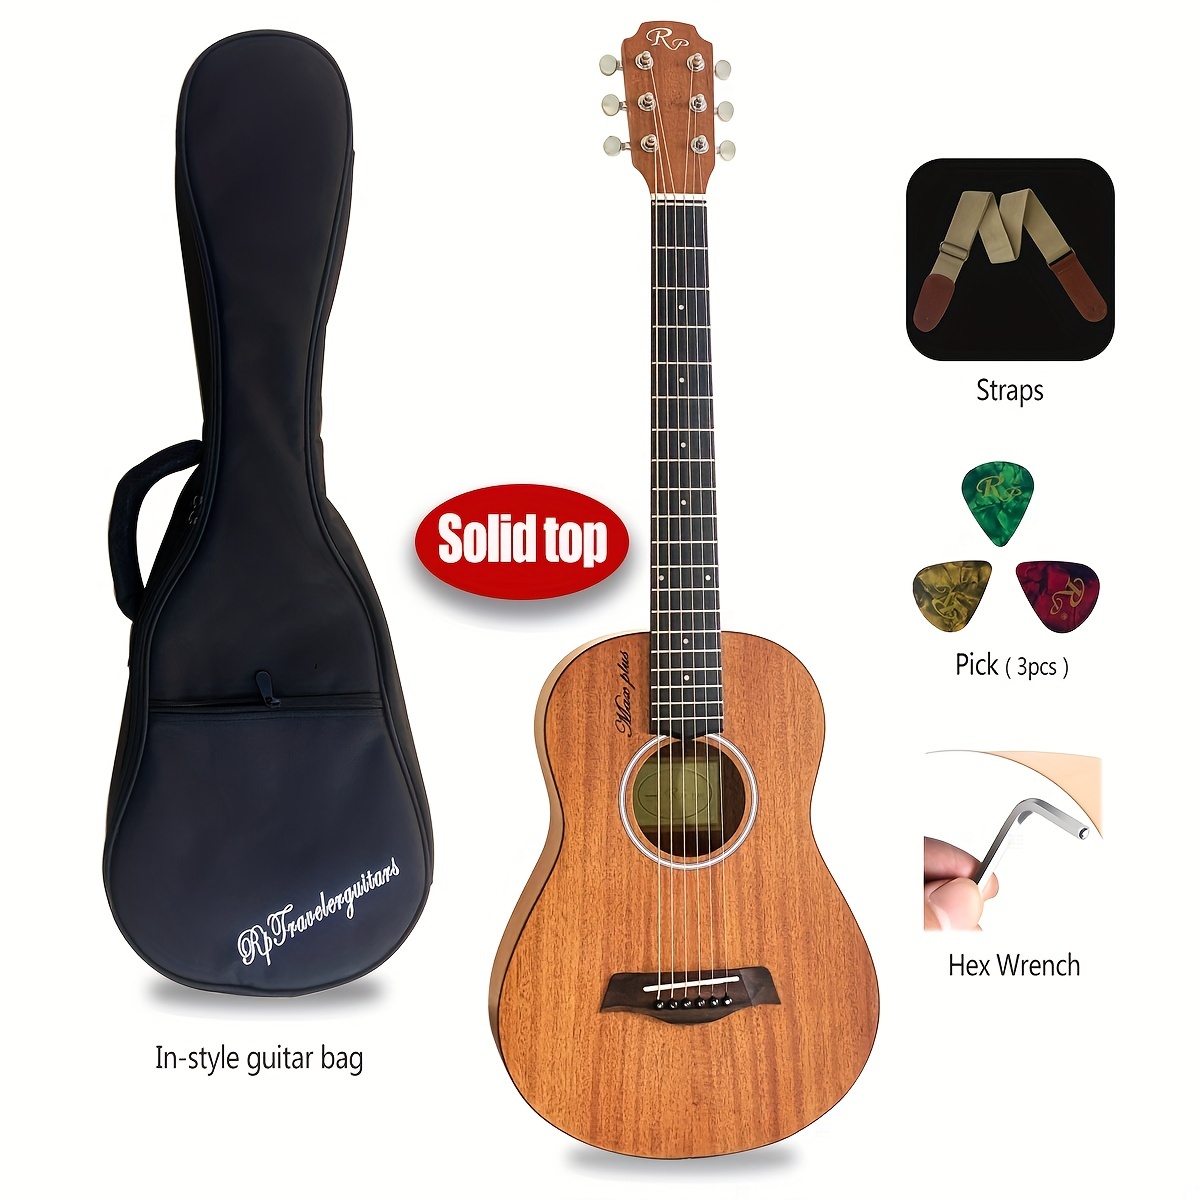 Indiana I-TB2N Thin Body Acoustic Electric Guitar, Natural